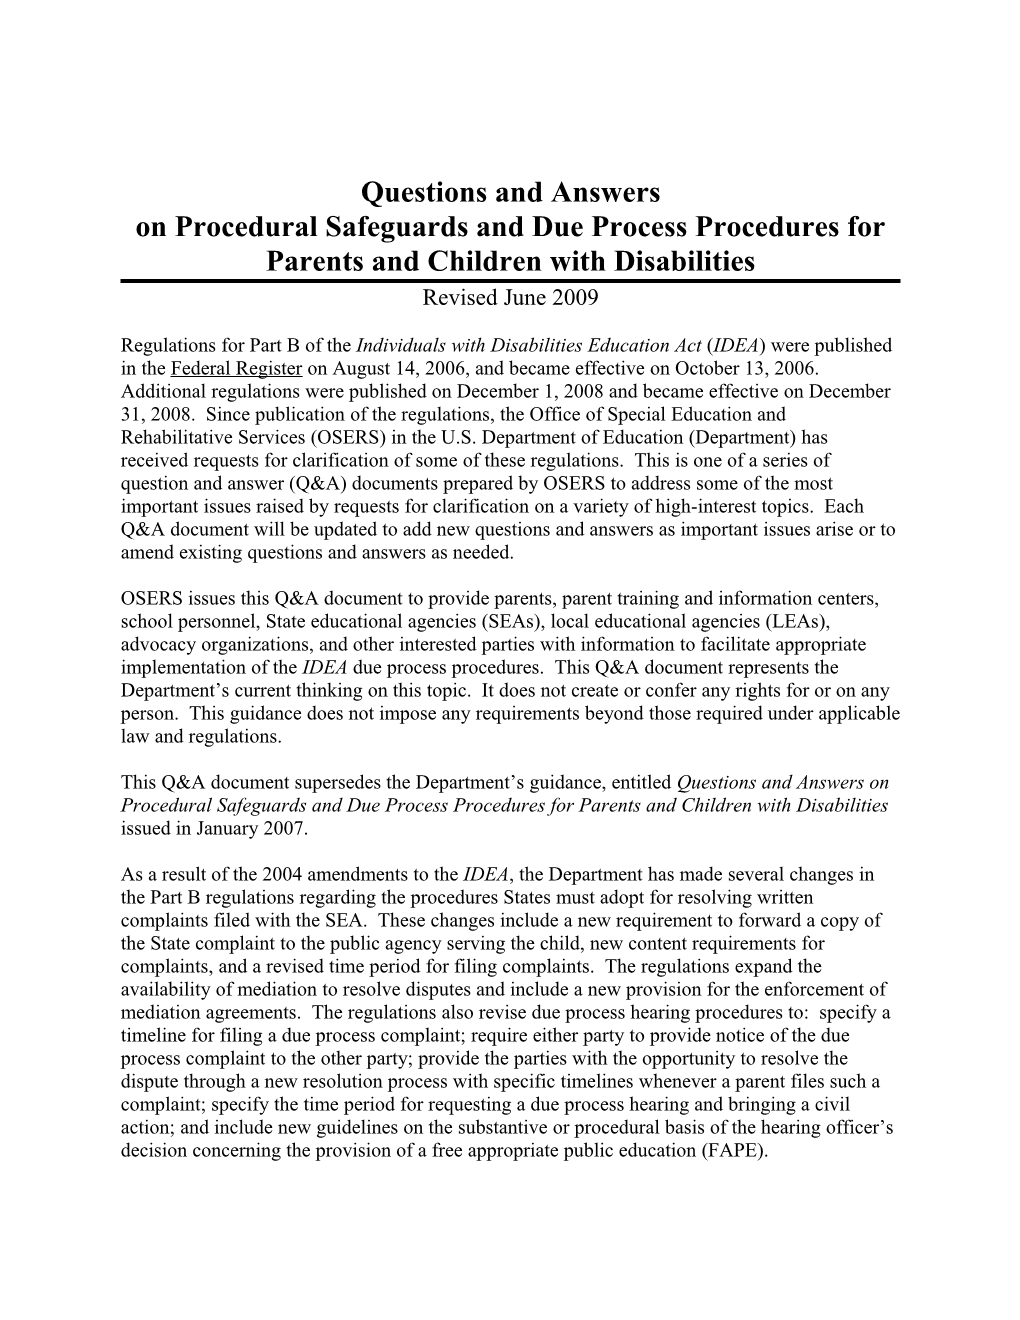 IDEA: Questions and Answers on Procedural Safeguards and Due Process Procedures for Parents